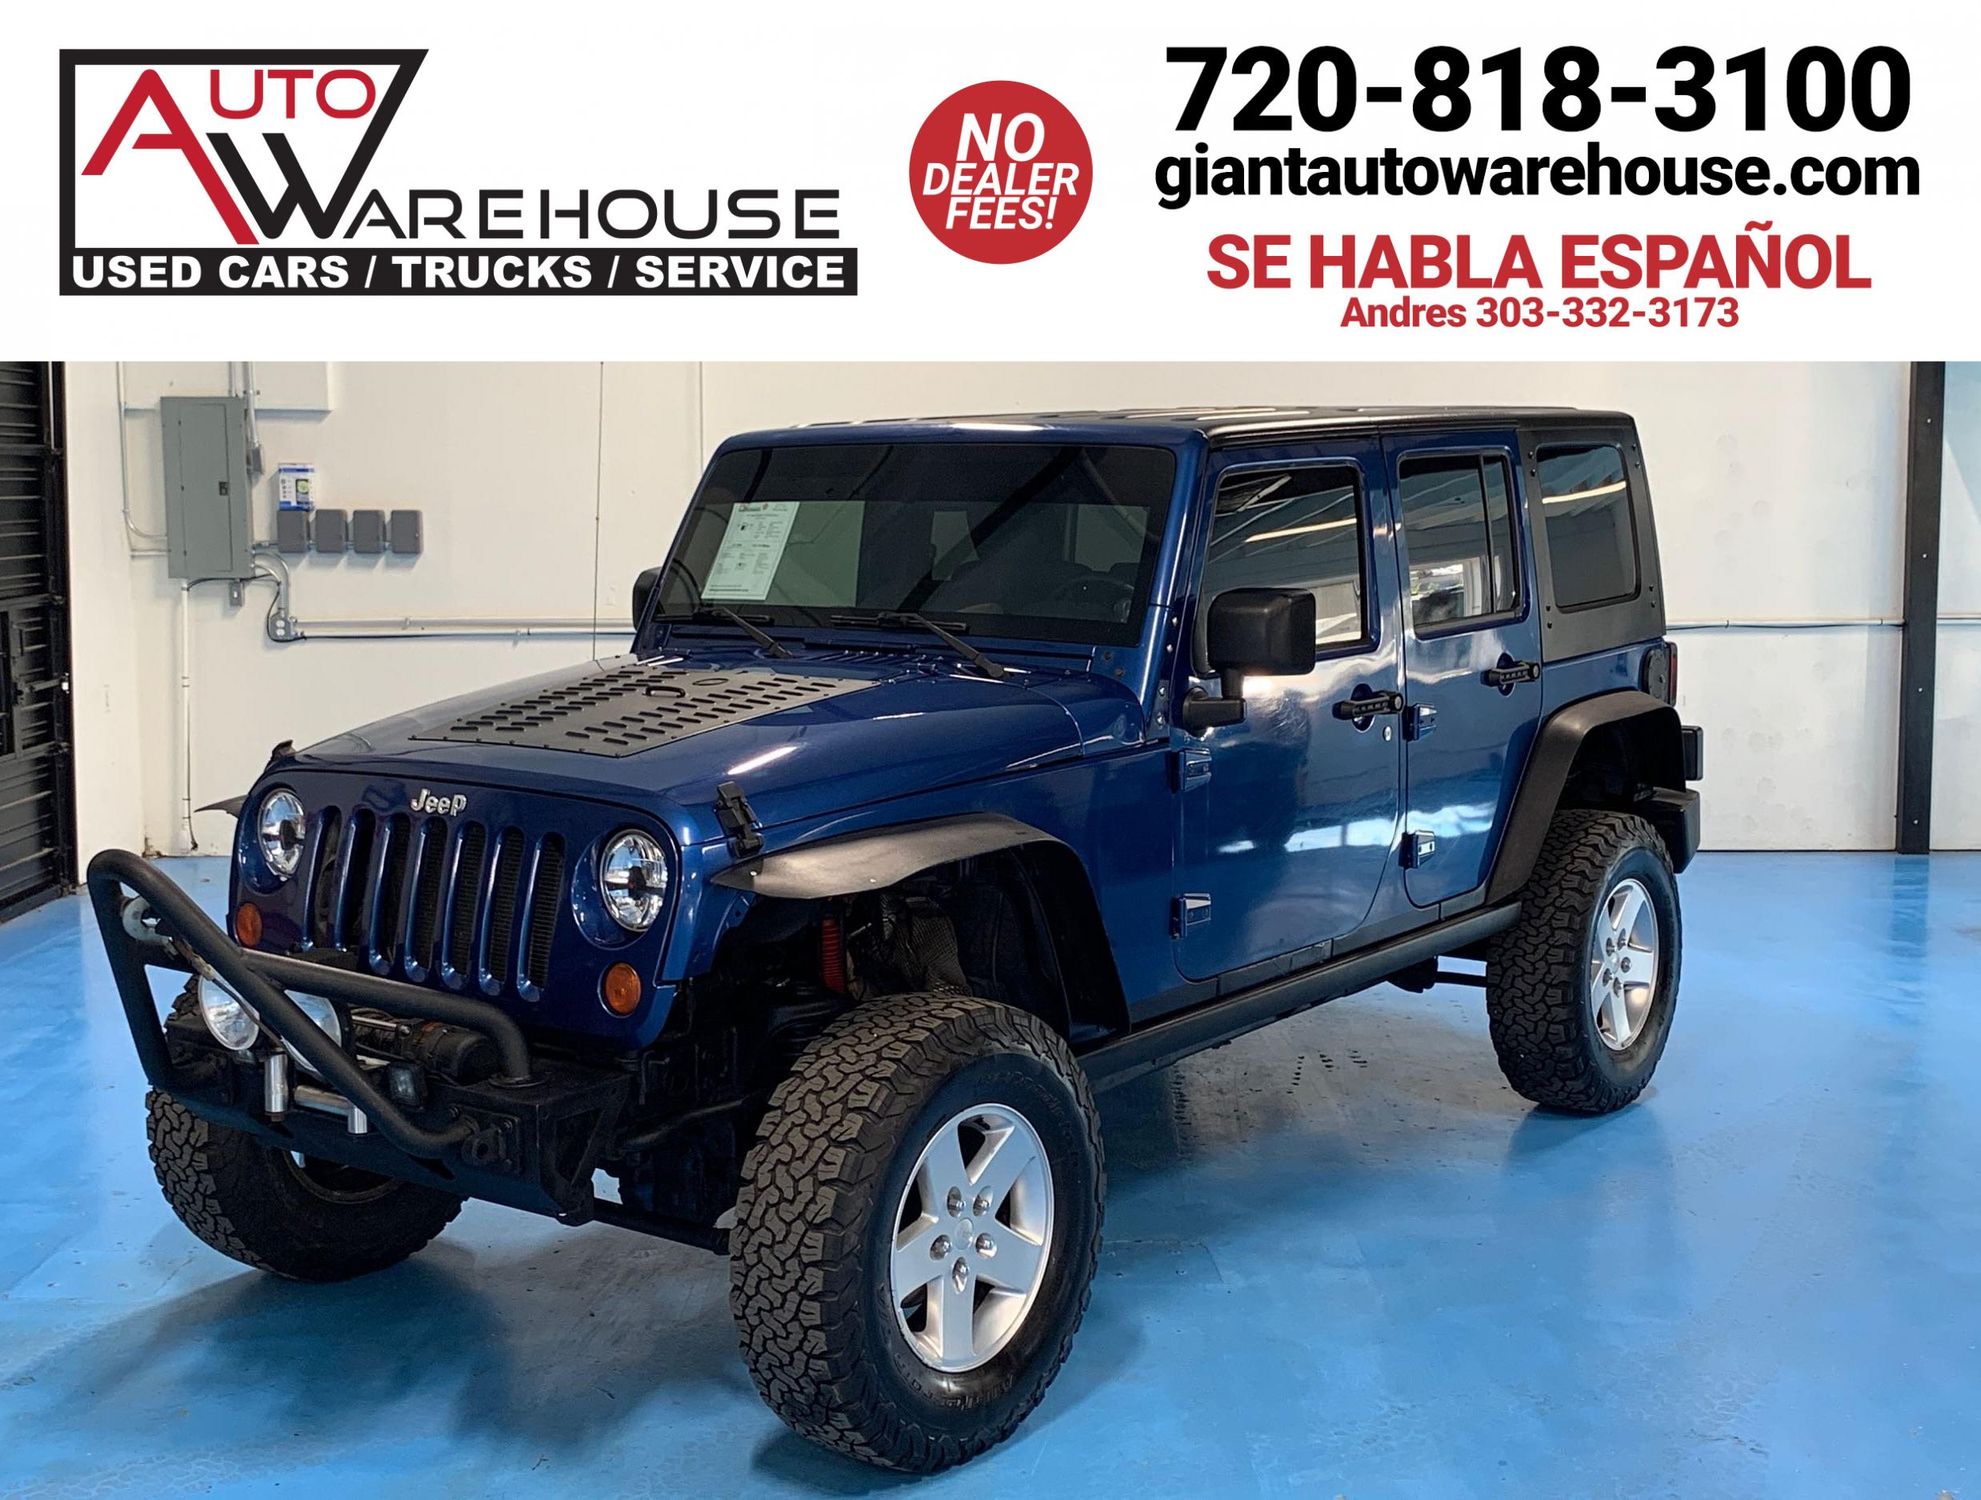 Jeep Wrangler Xl - Top Jeep How Much Does A 2 Door Jeep Wrangler Weigh